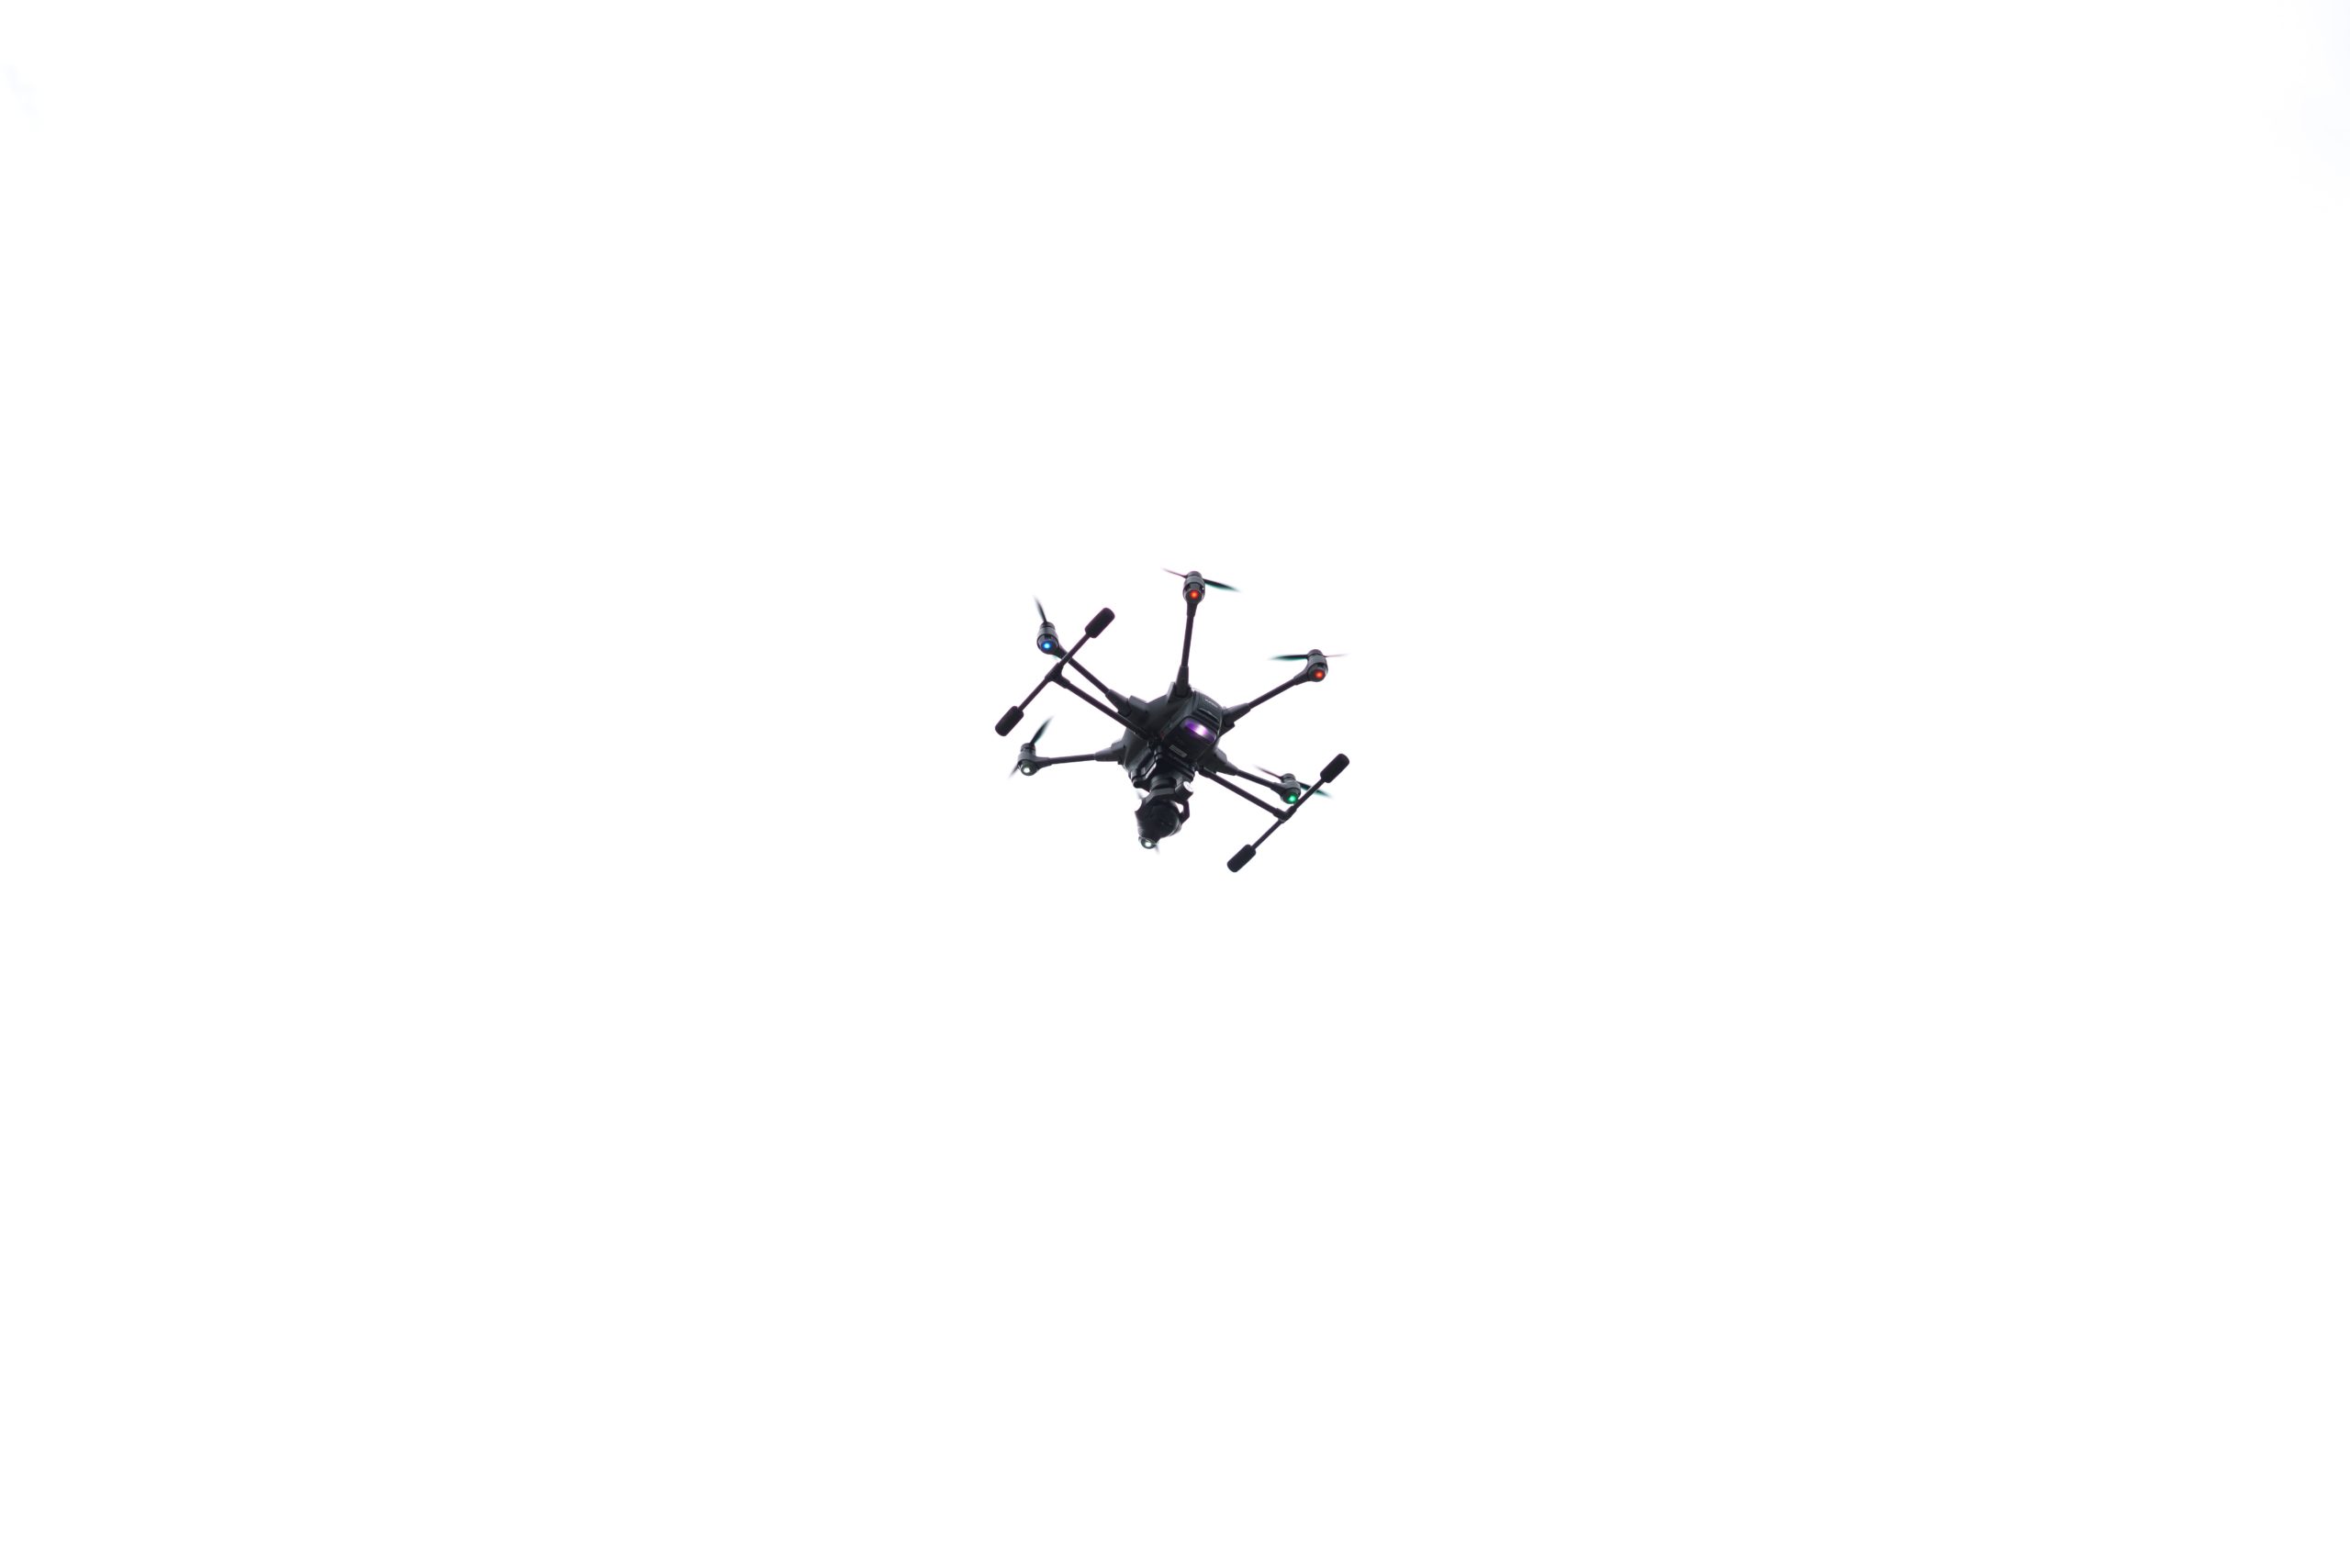 Development of a program capable of controlling multiple drones simultaneously with motion capture cameras by Gaëtan Permentiers – UCLouvain